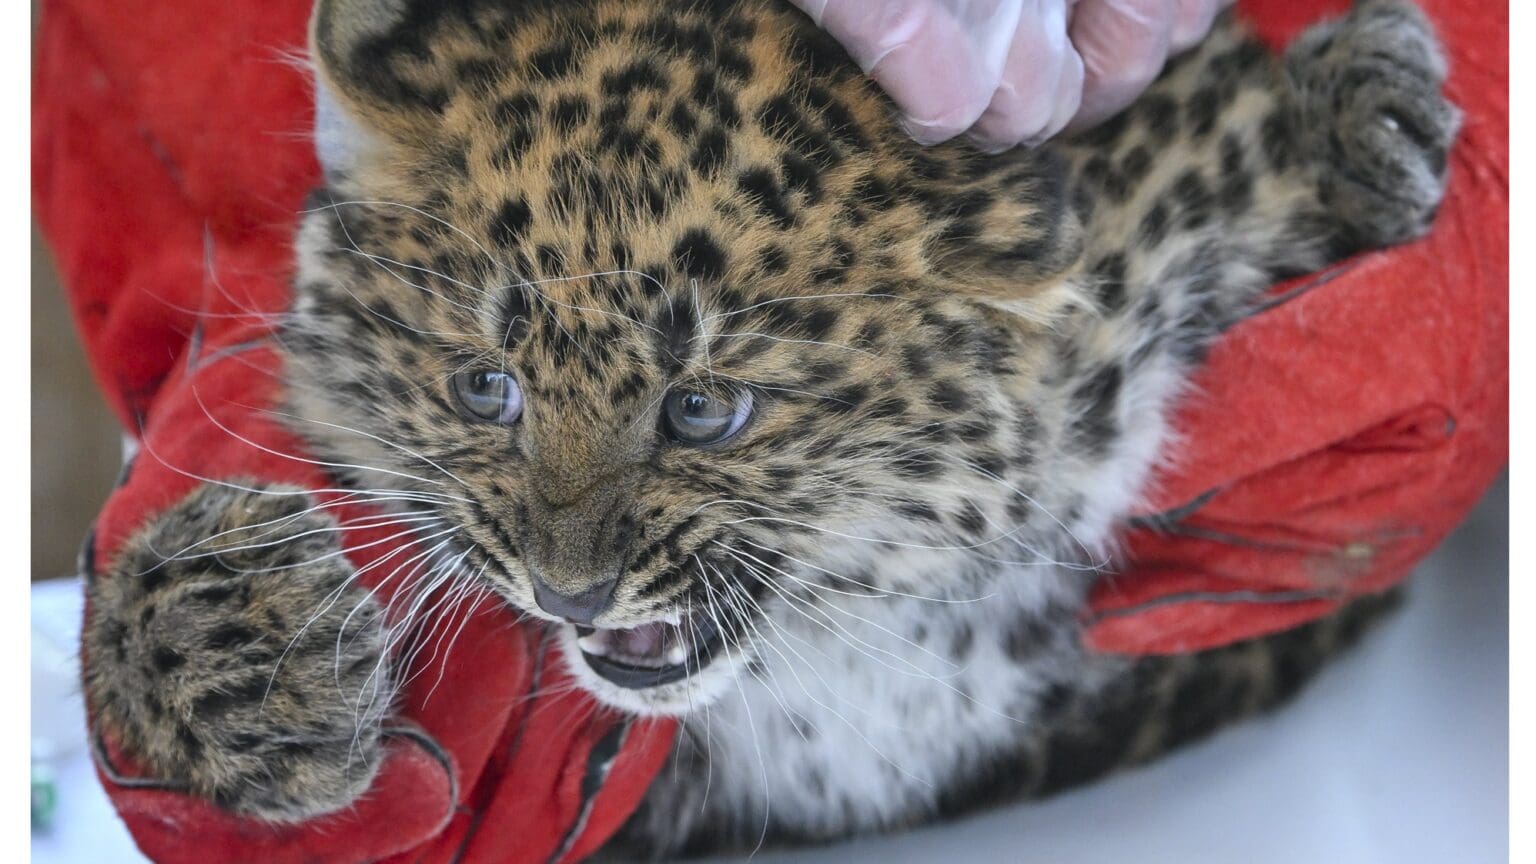 North-Chinese Leopard Cub at Zoo Debrecen Named Mulan in Online Poll